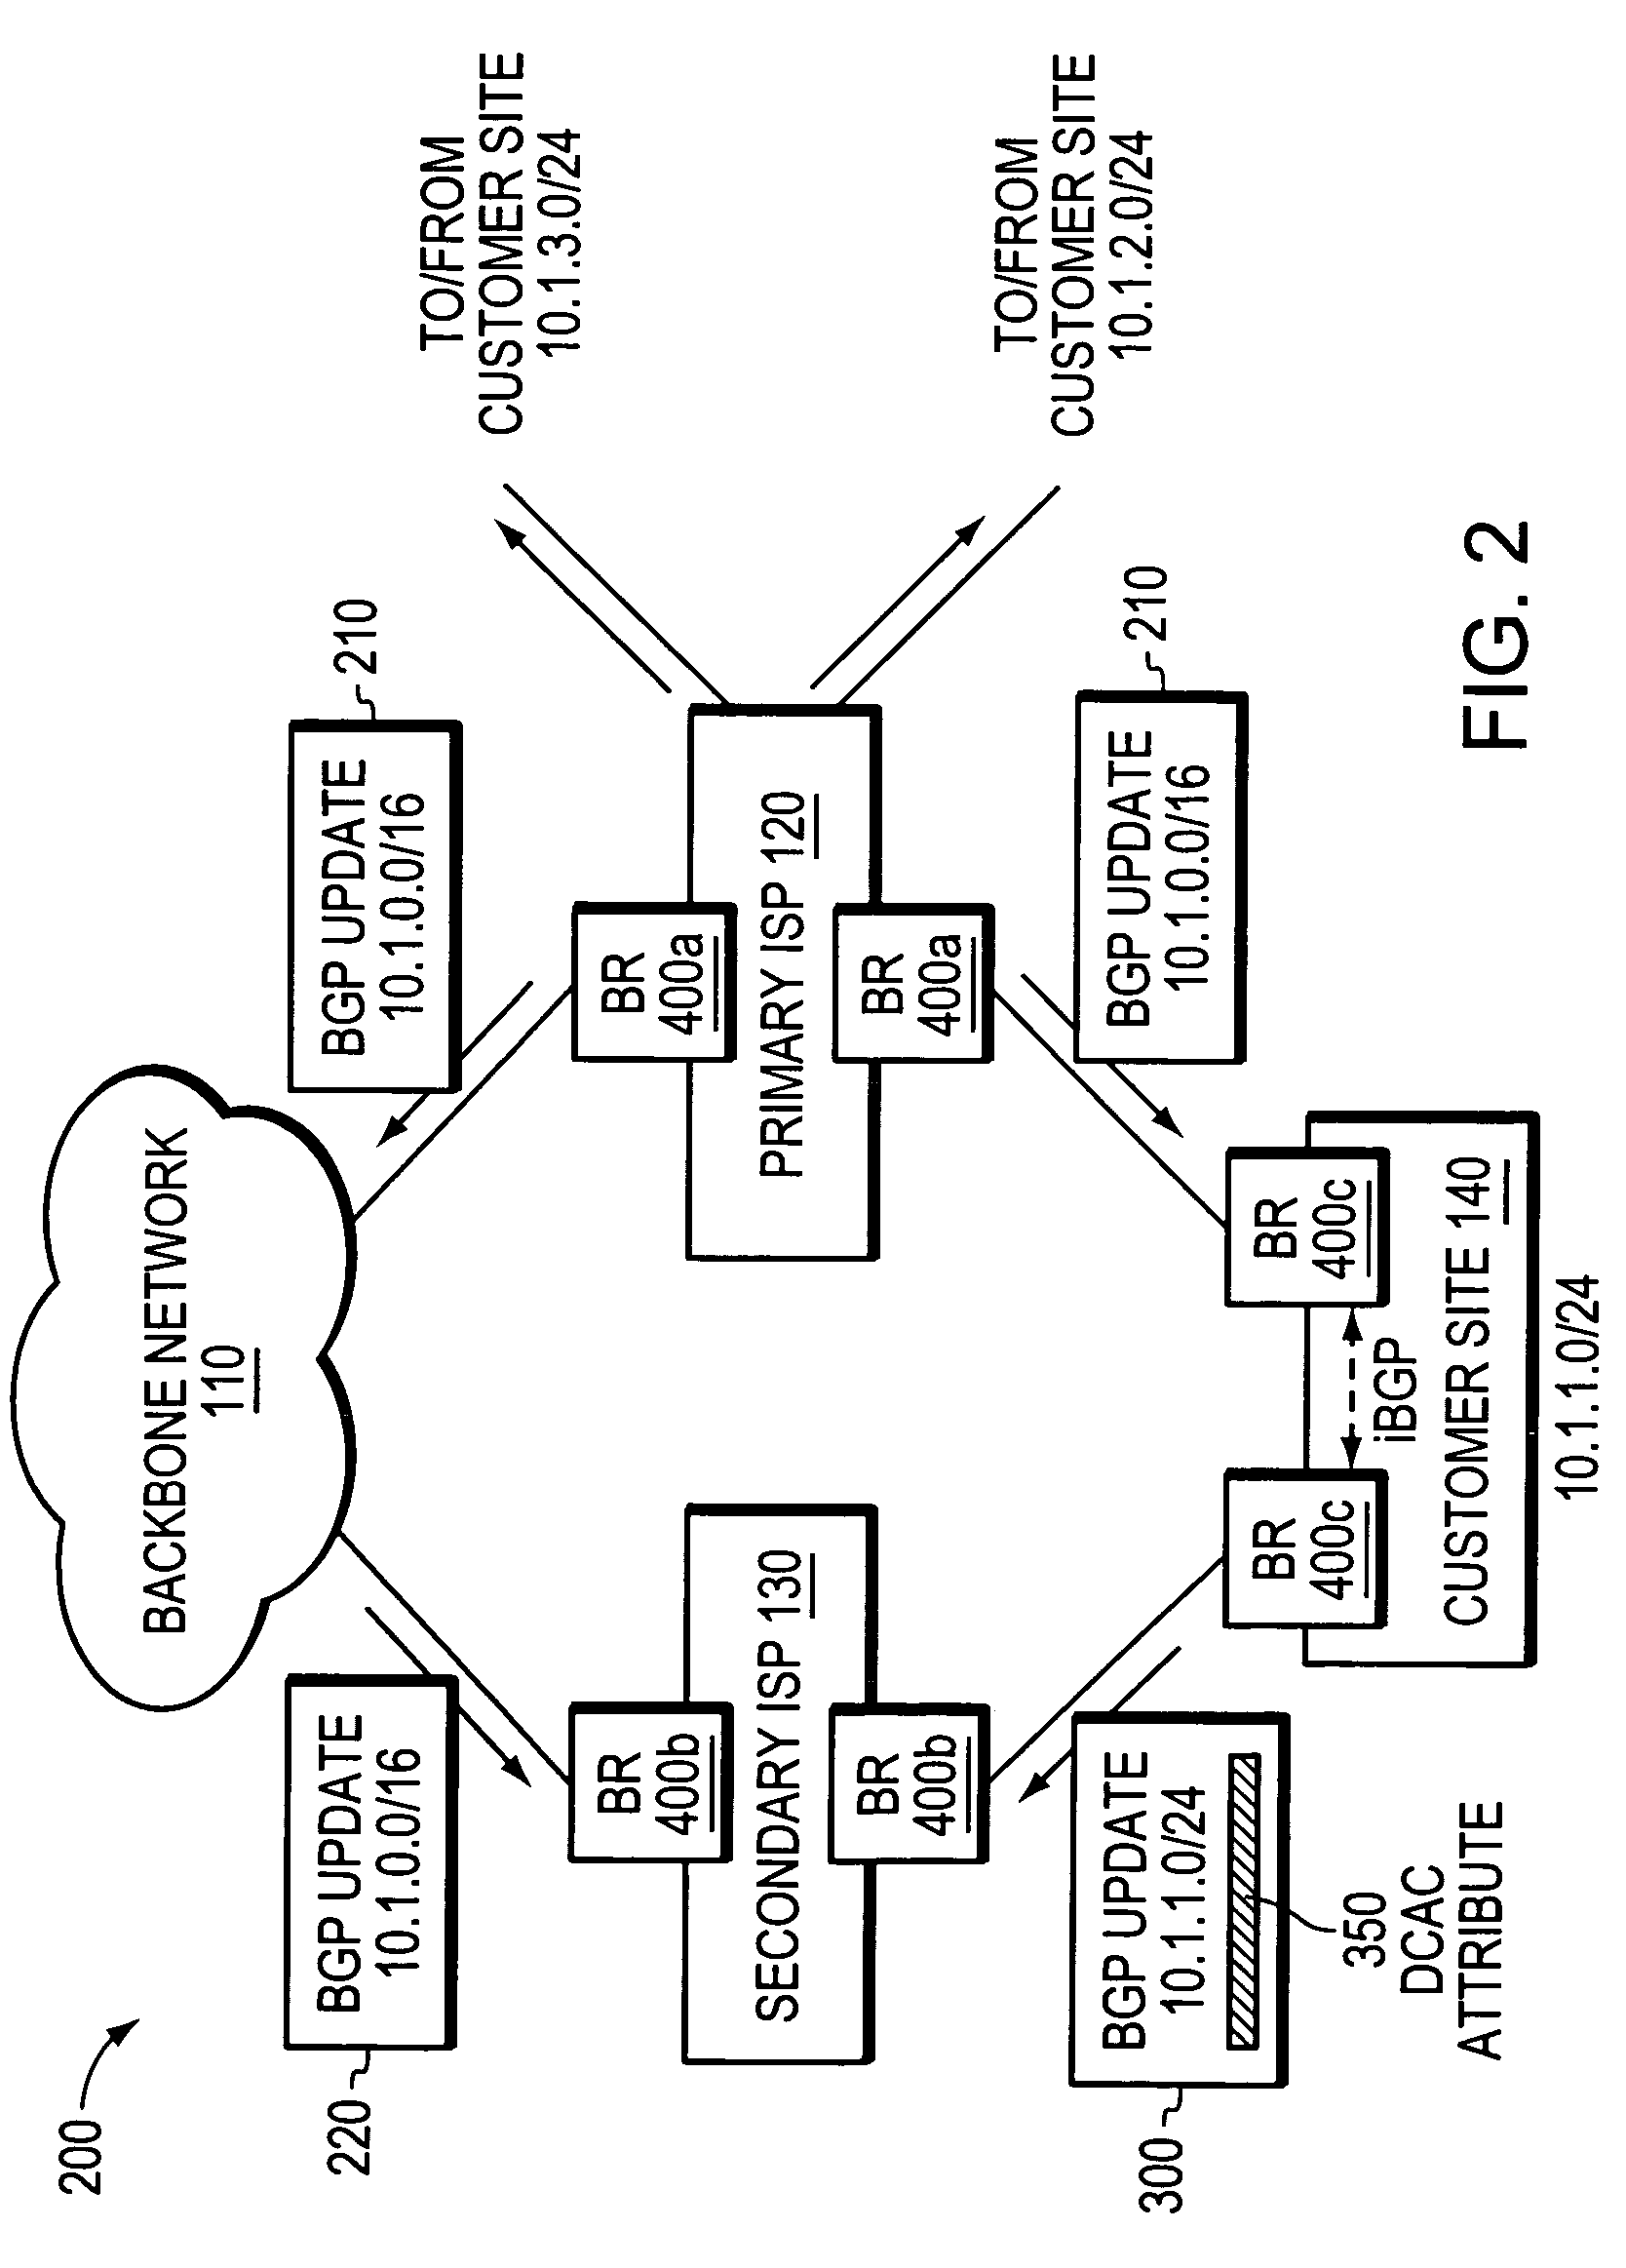 Multi-homing using controlled route leakage at a backup service provider